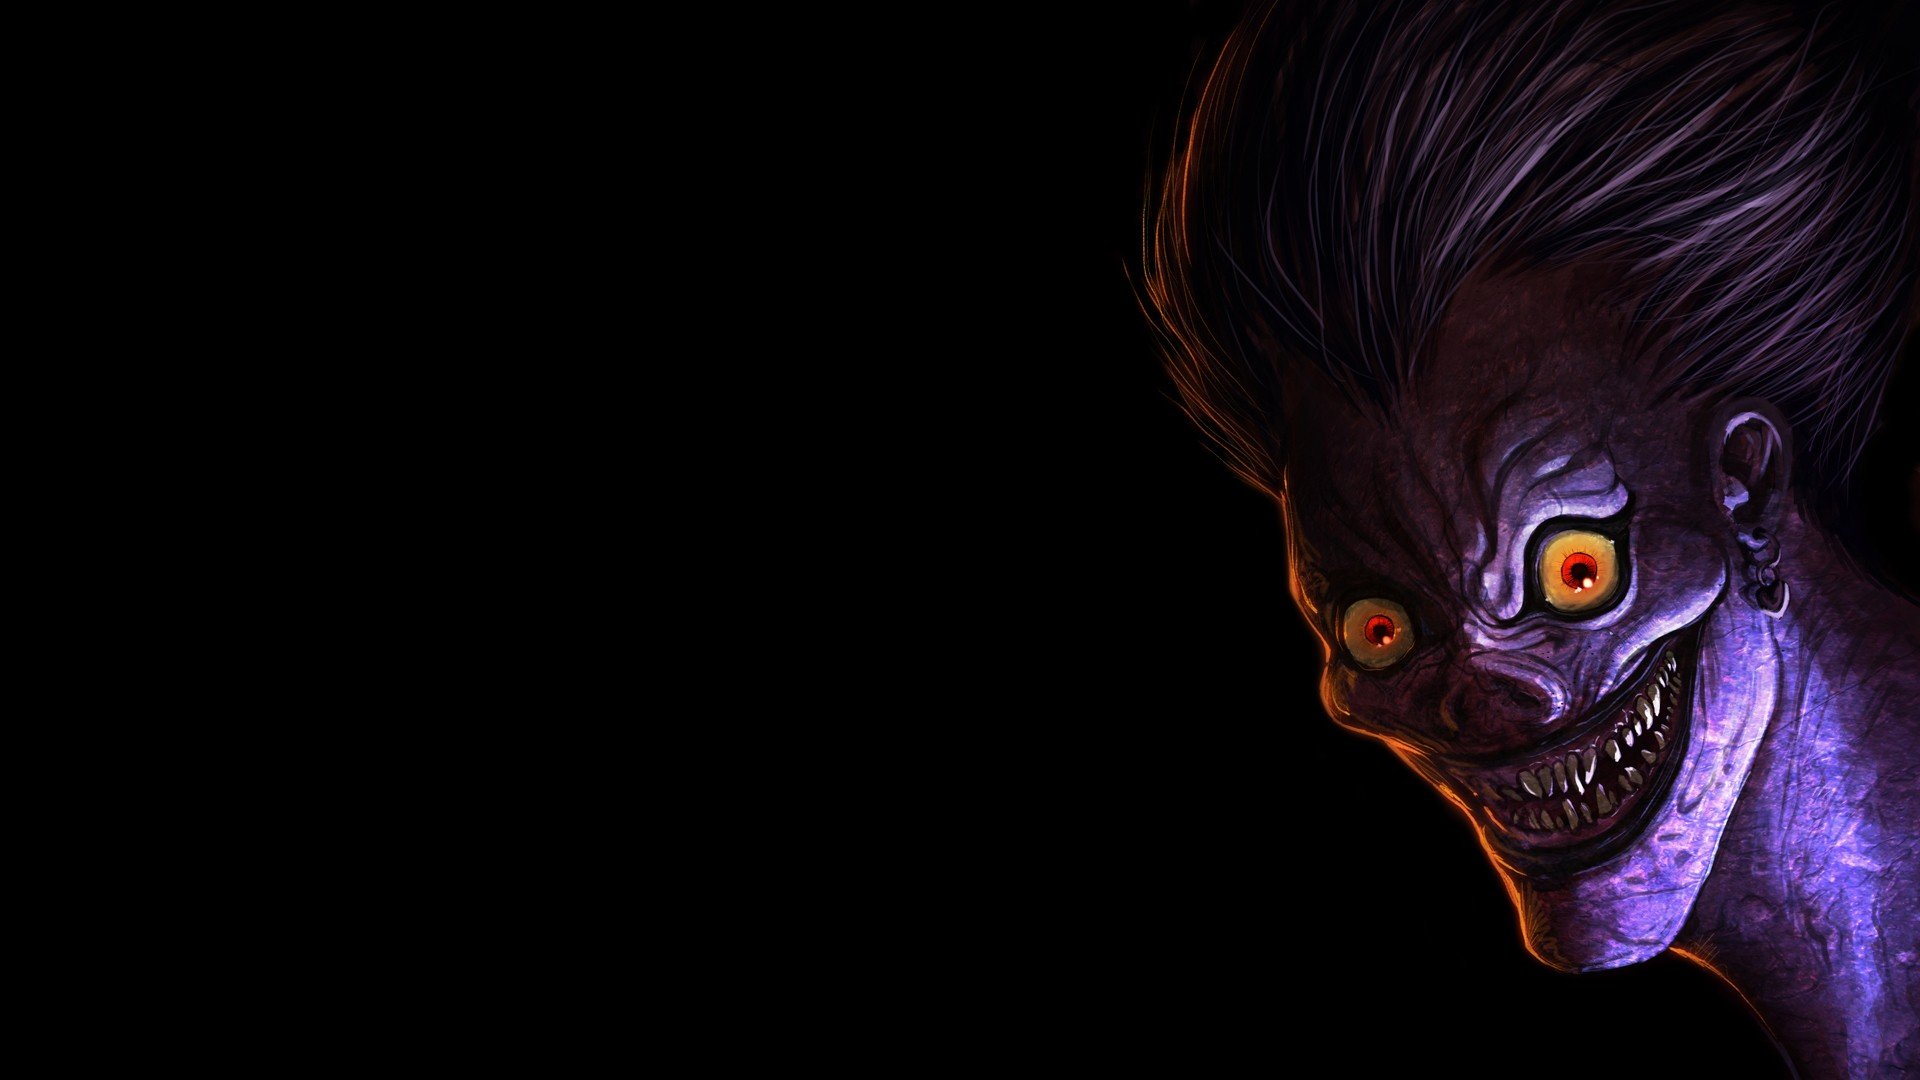 Death Note Ryuk Hd Wallpapers Desktop And Mobile Images Photos We hope you enjoy our rising collection of death note wallpaper. death note ryuk hd wallpapers